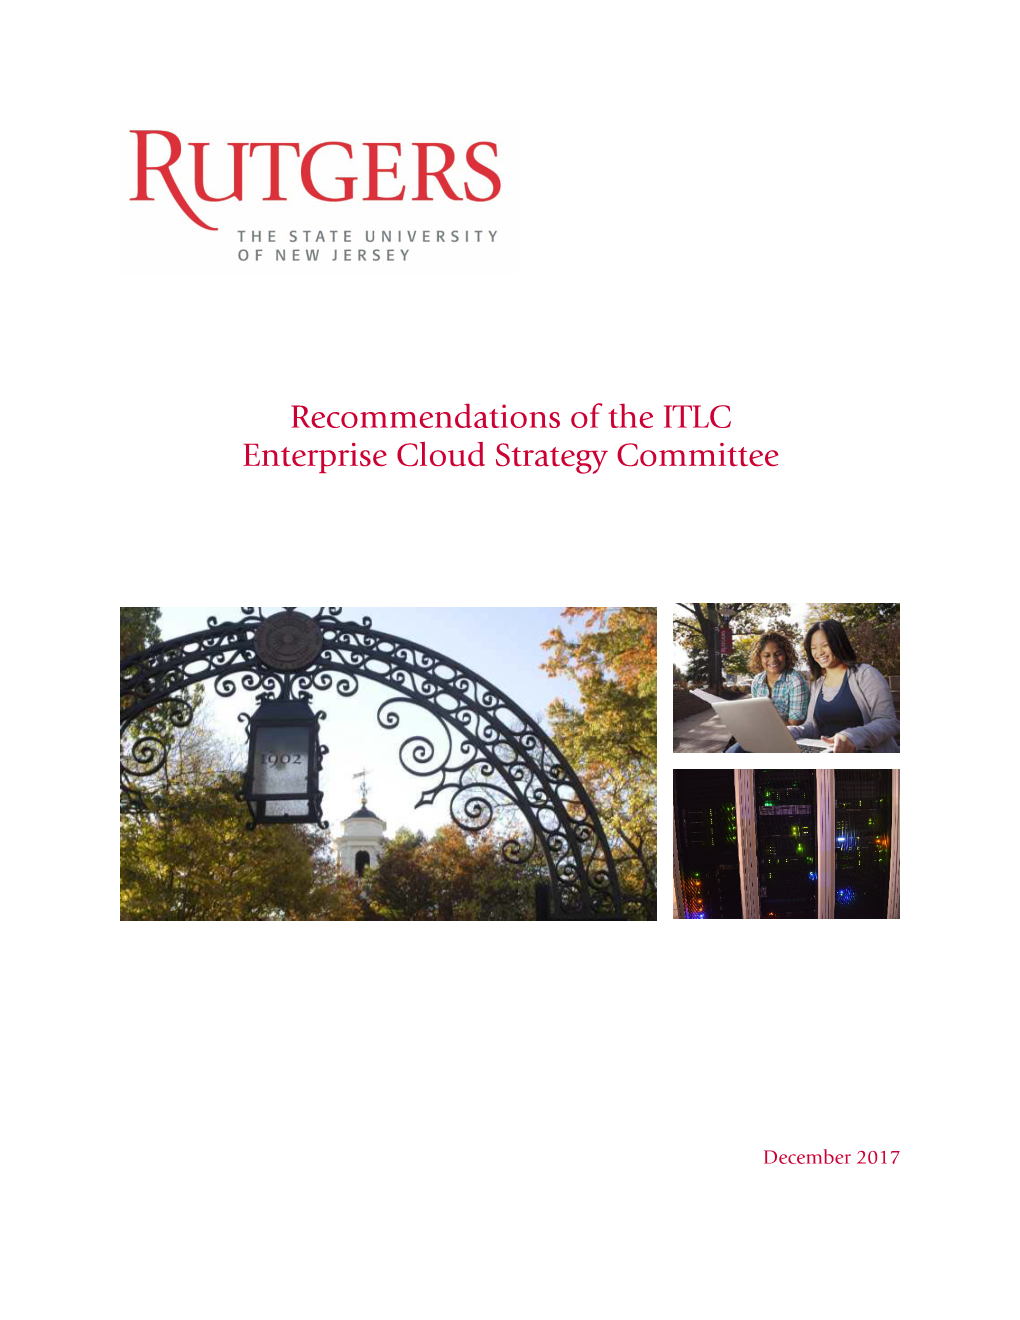 Recommendations of the ITLC Enterprise Cloud Strategy Committee